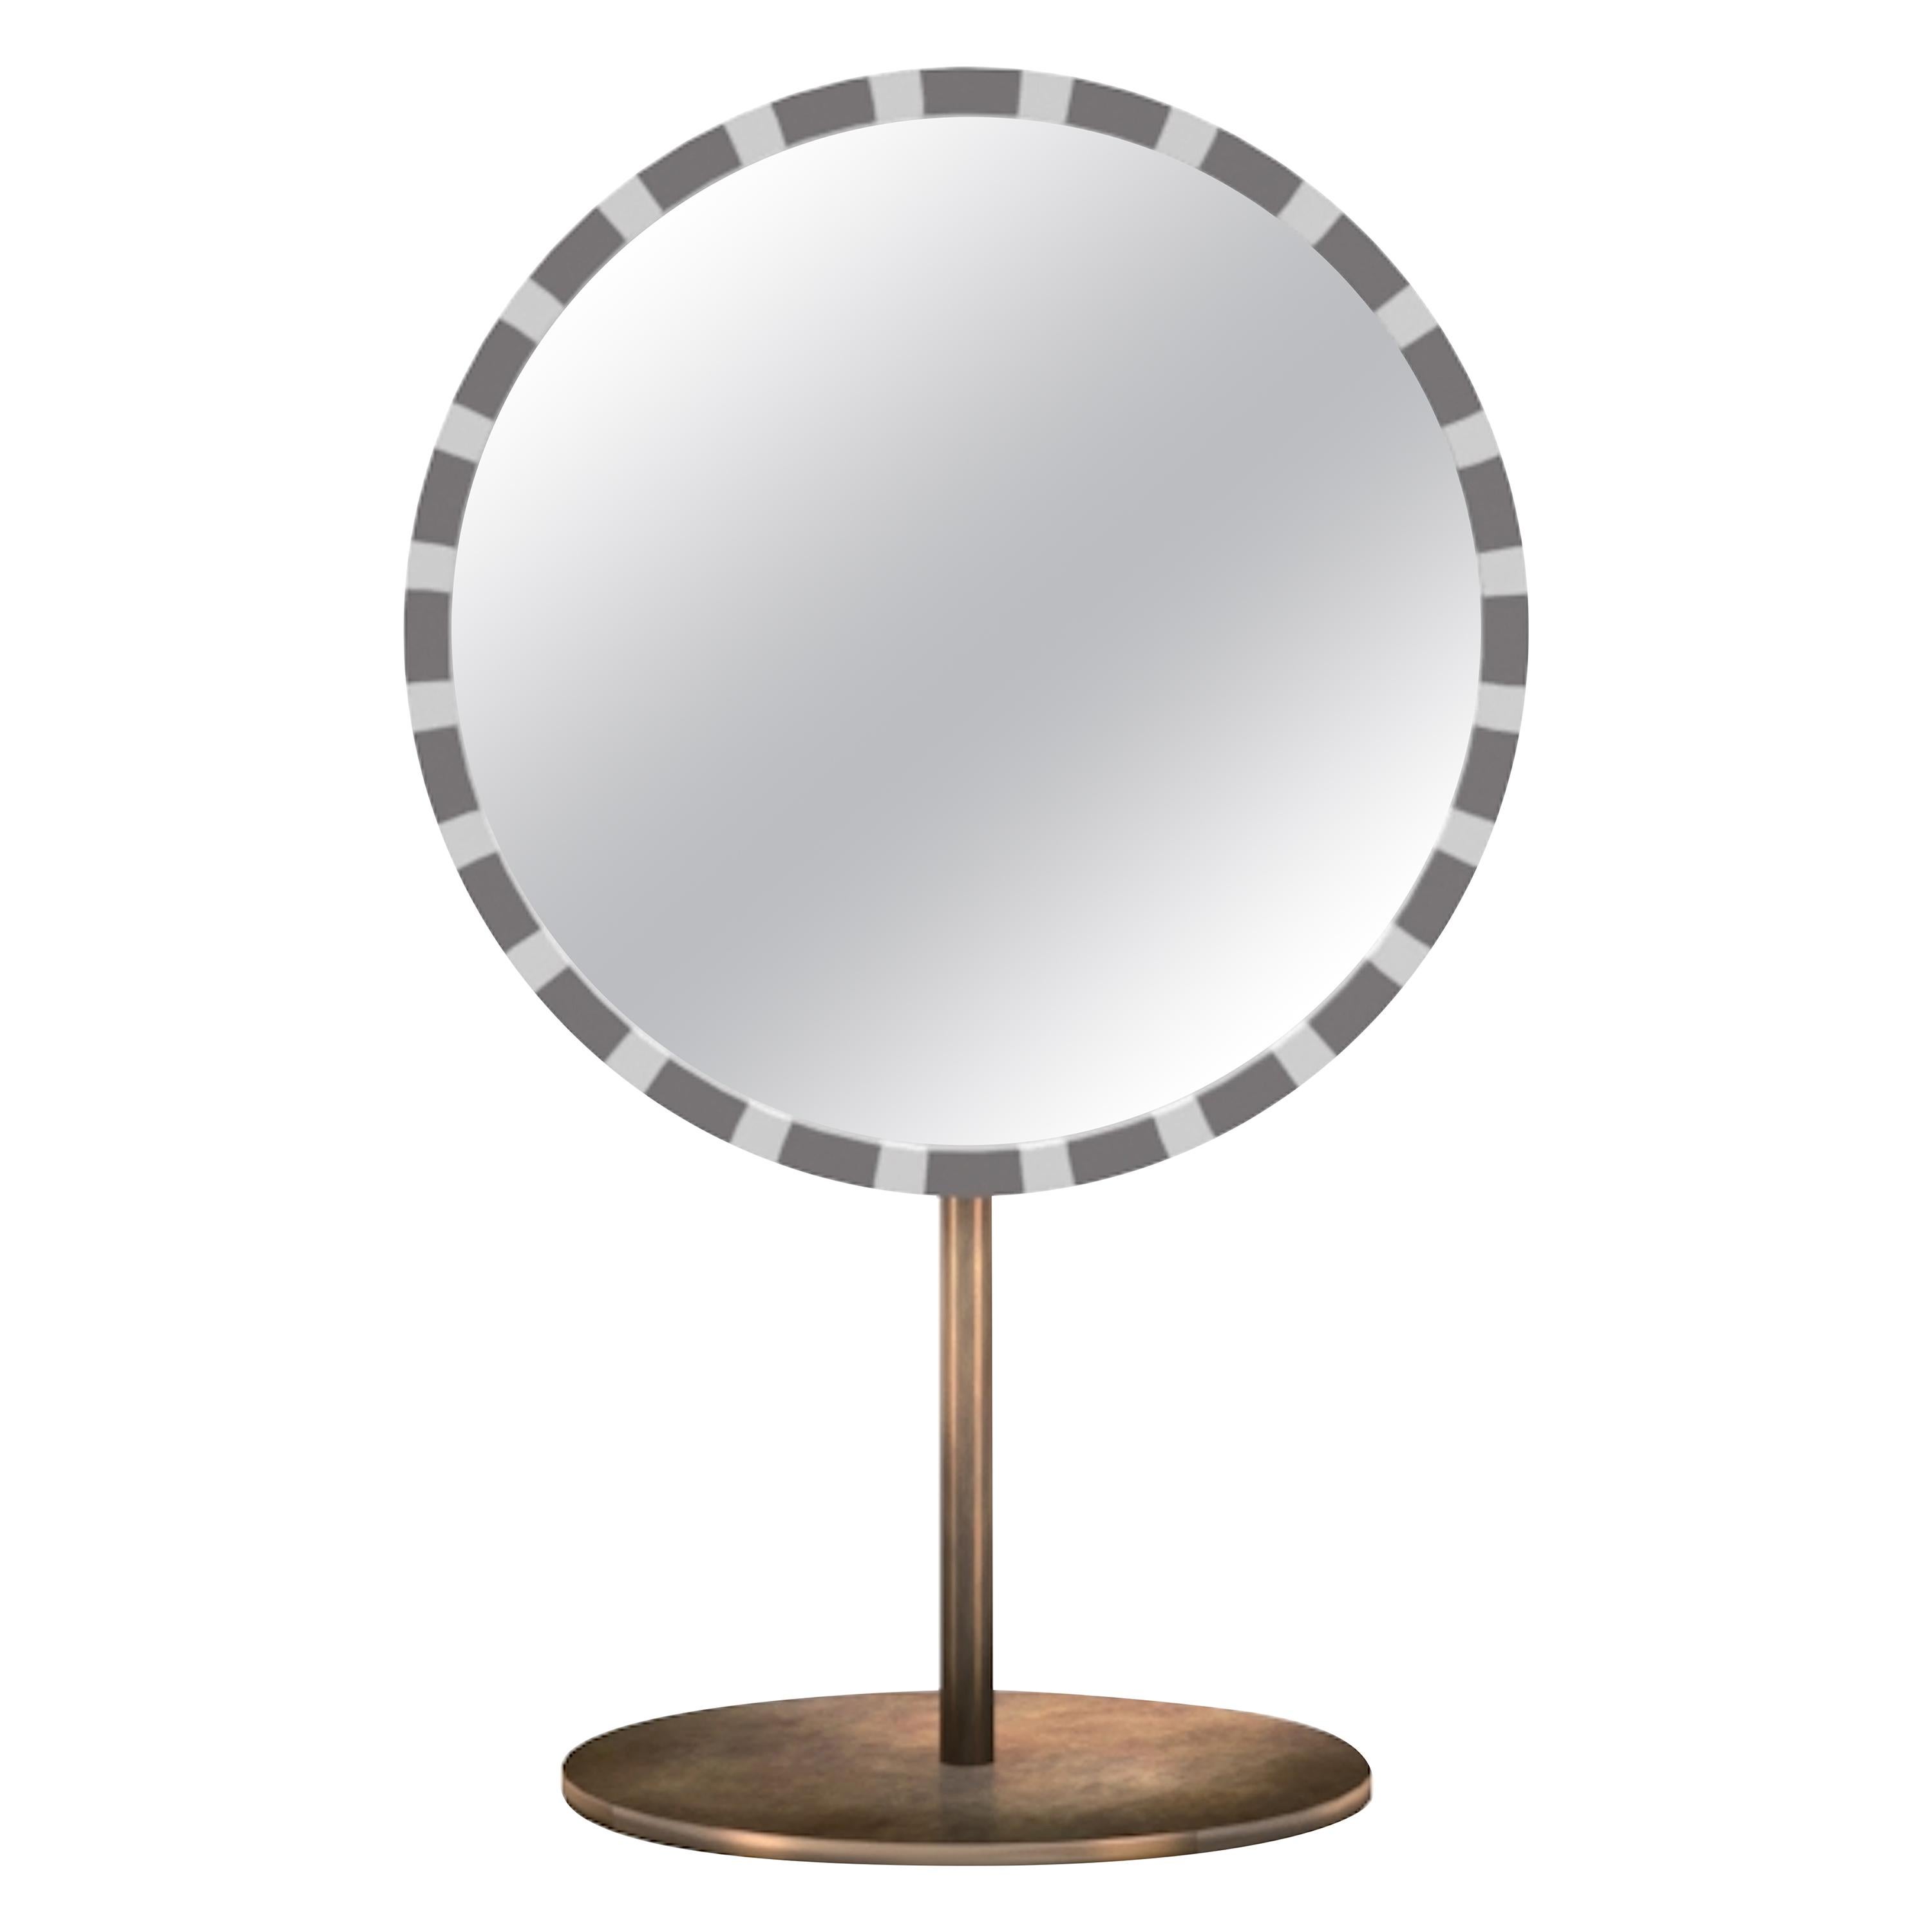 Paris Table Mirror Gray and White by Matteo Cibic